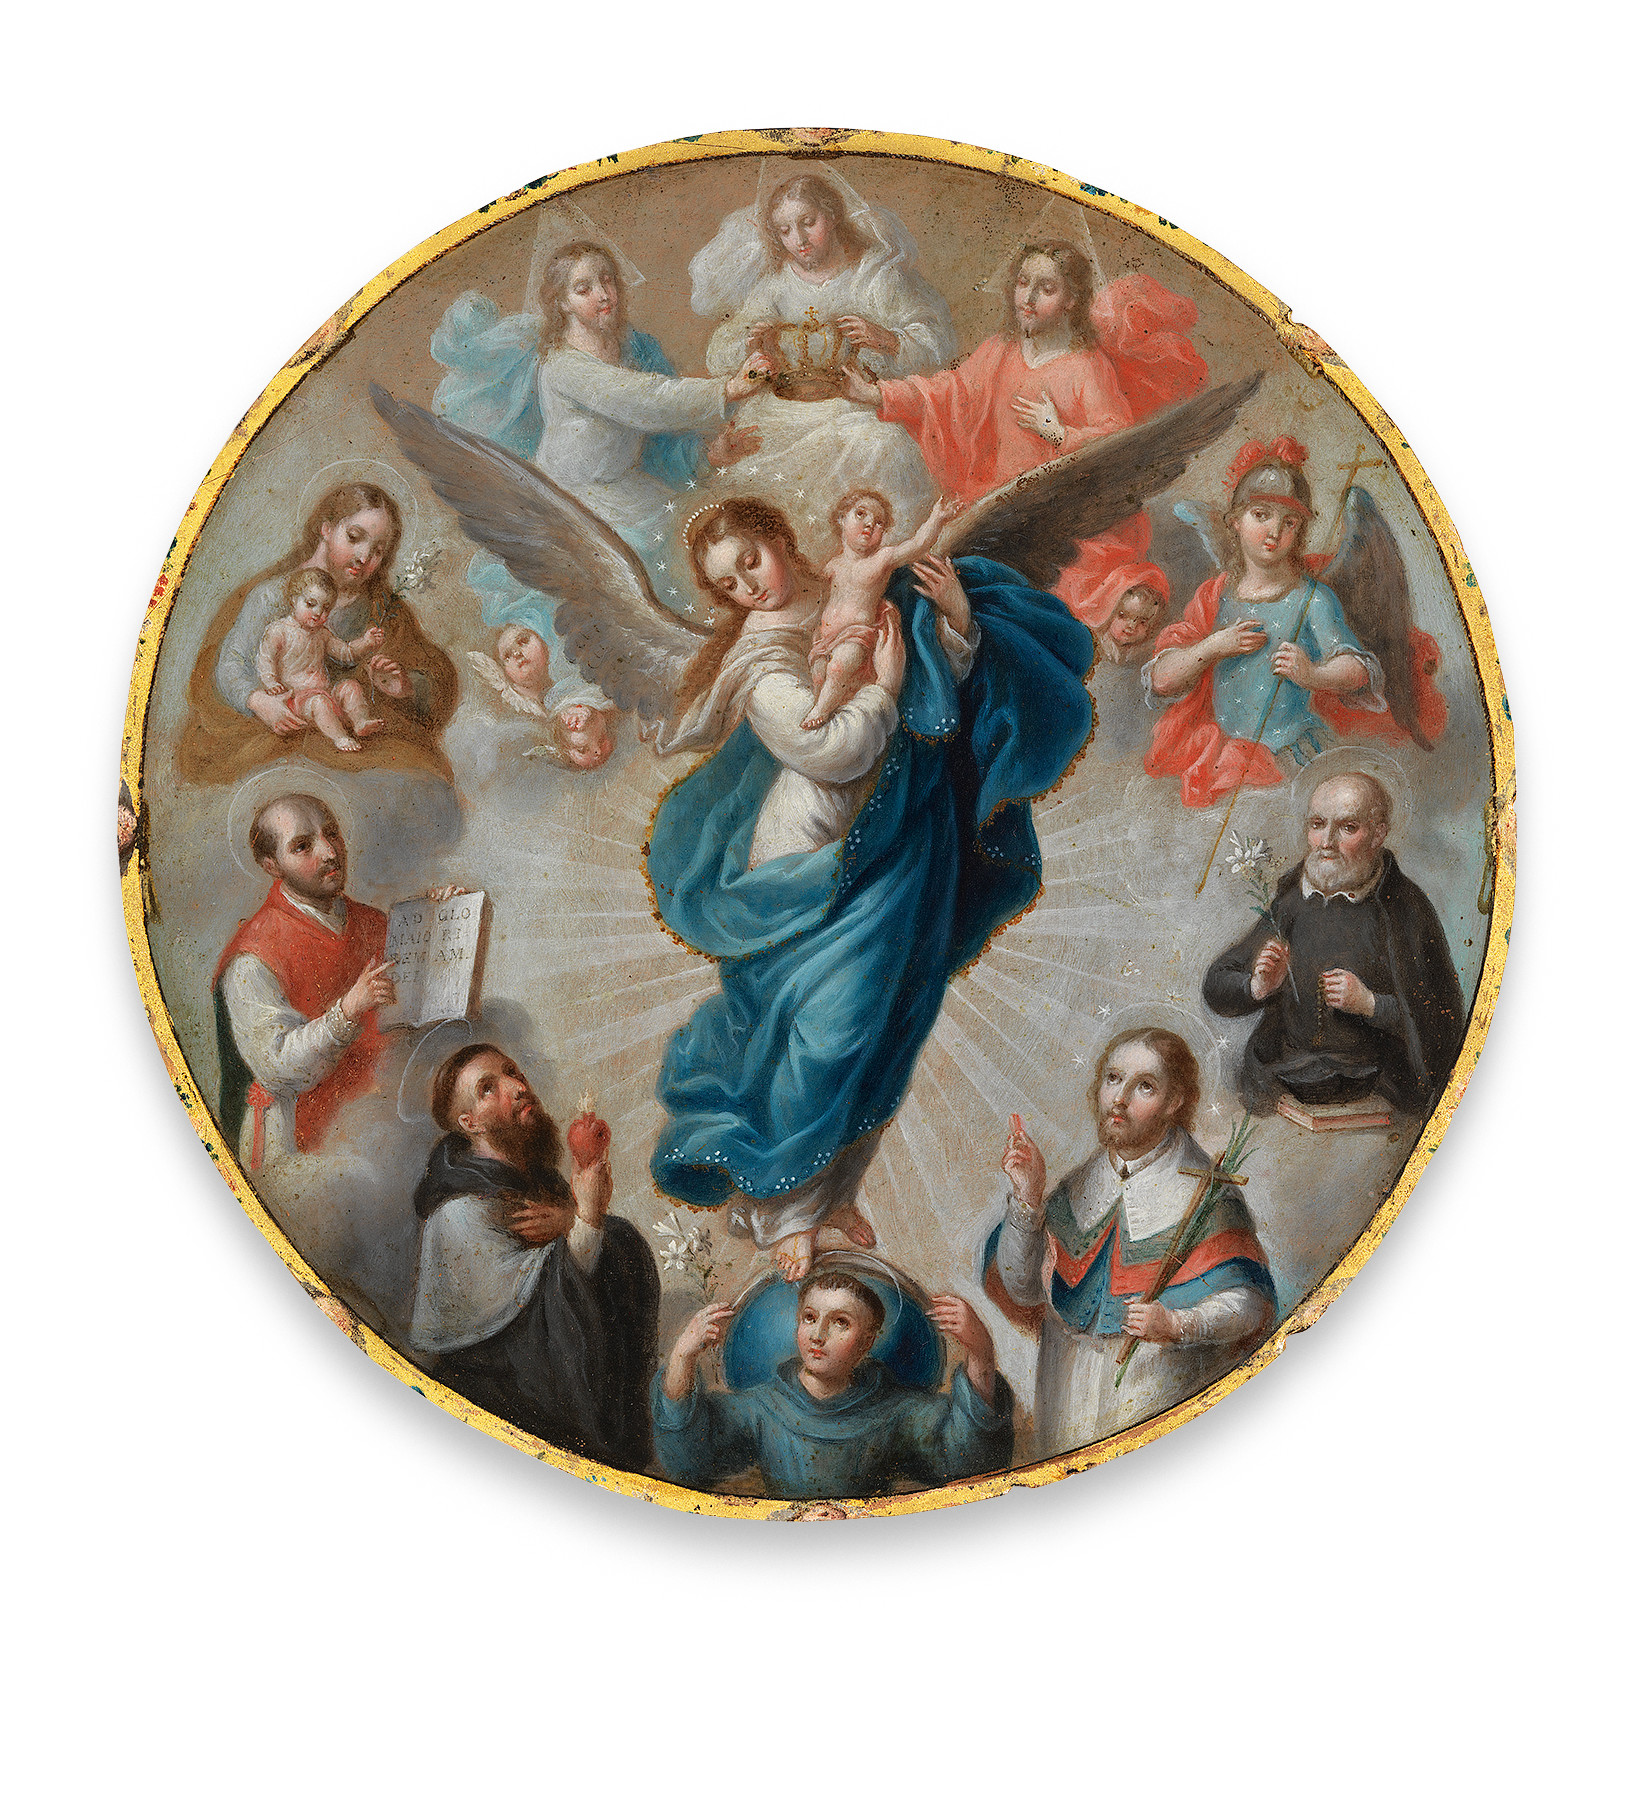 Round painting with the Virgin of the apocalypse in the center surrounded by various saints